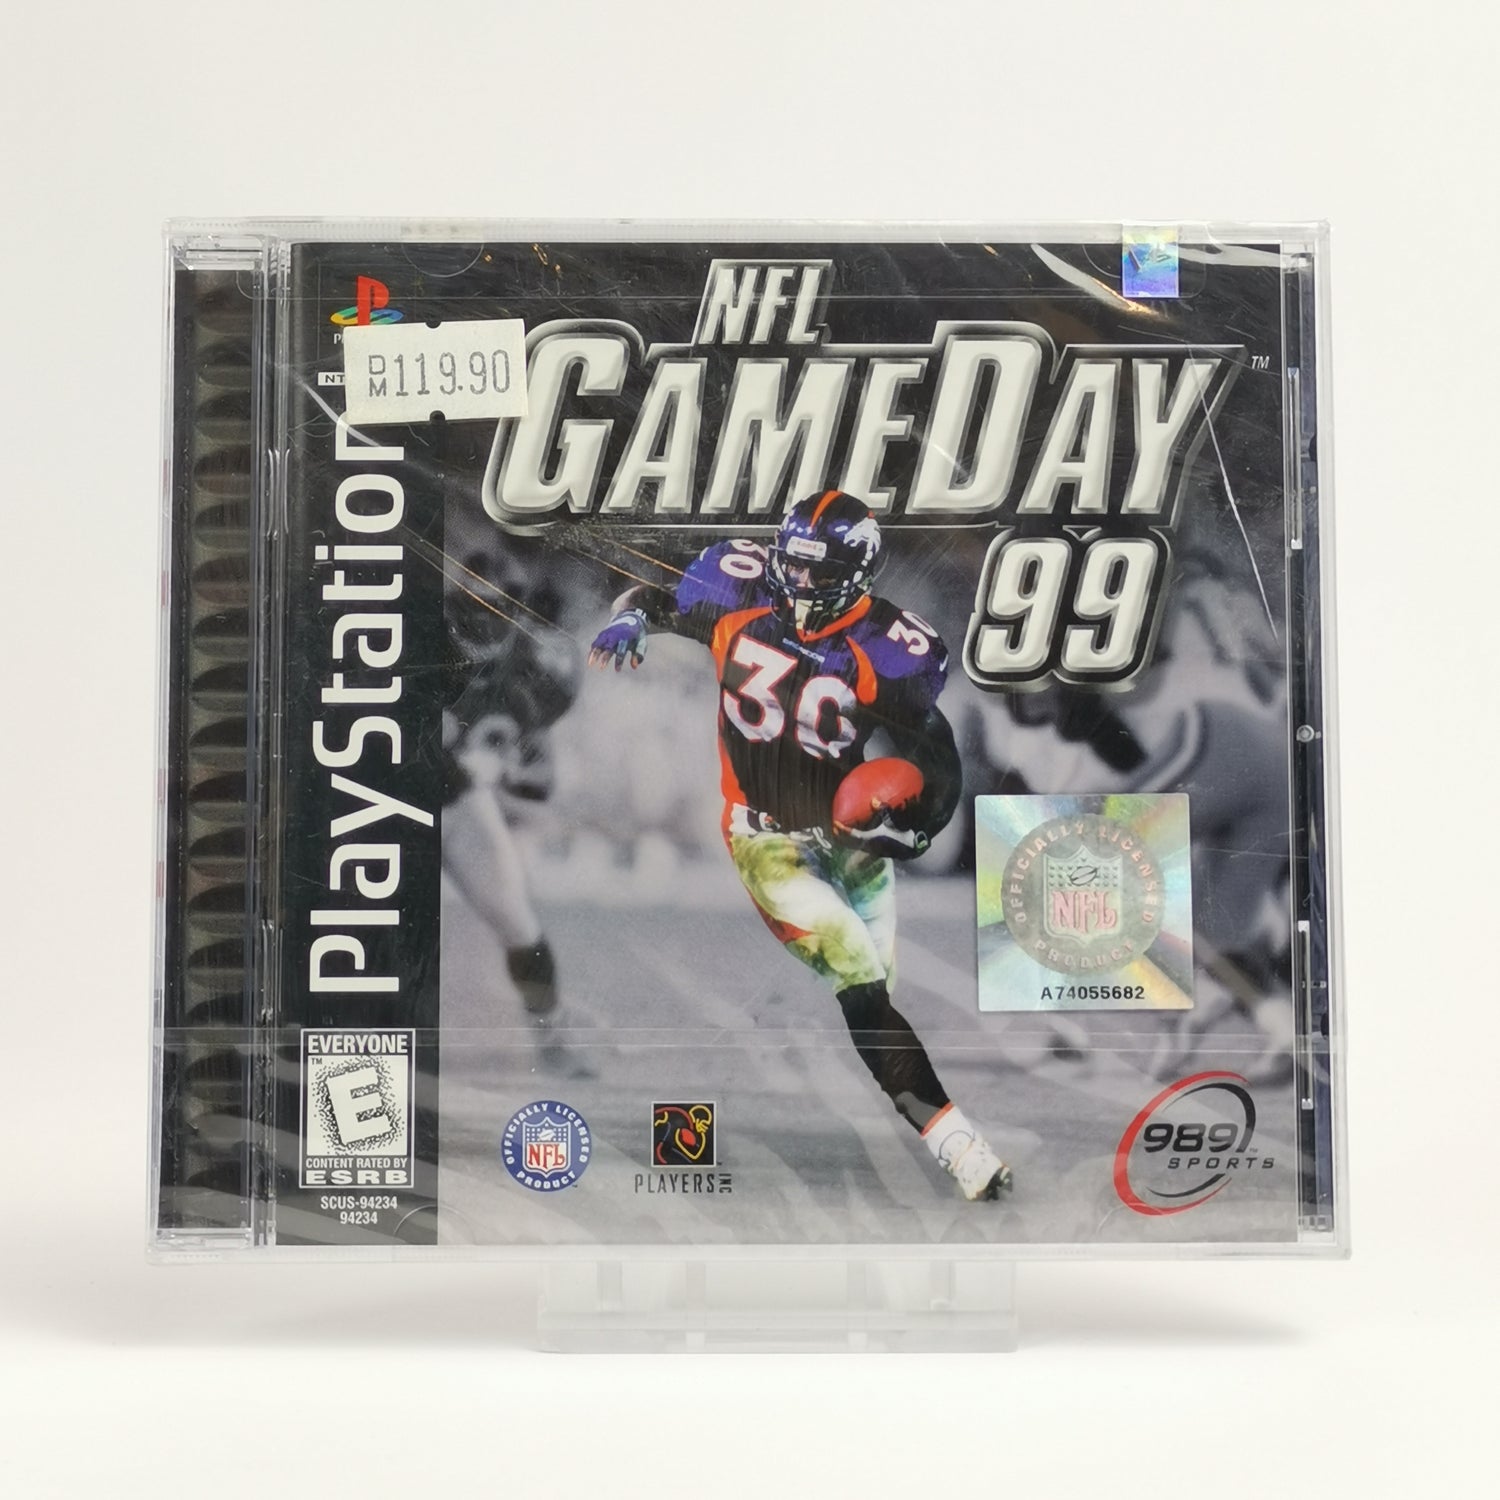 Sony Playstation 1 Game: NFL Gameday 99 | PS1 boxes - NEW NEW SEALED